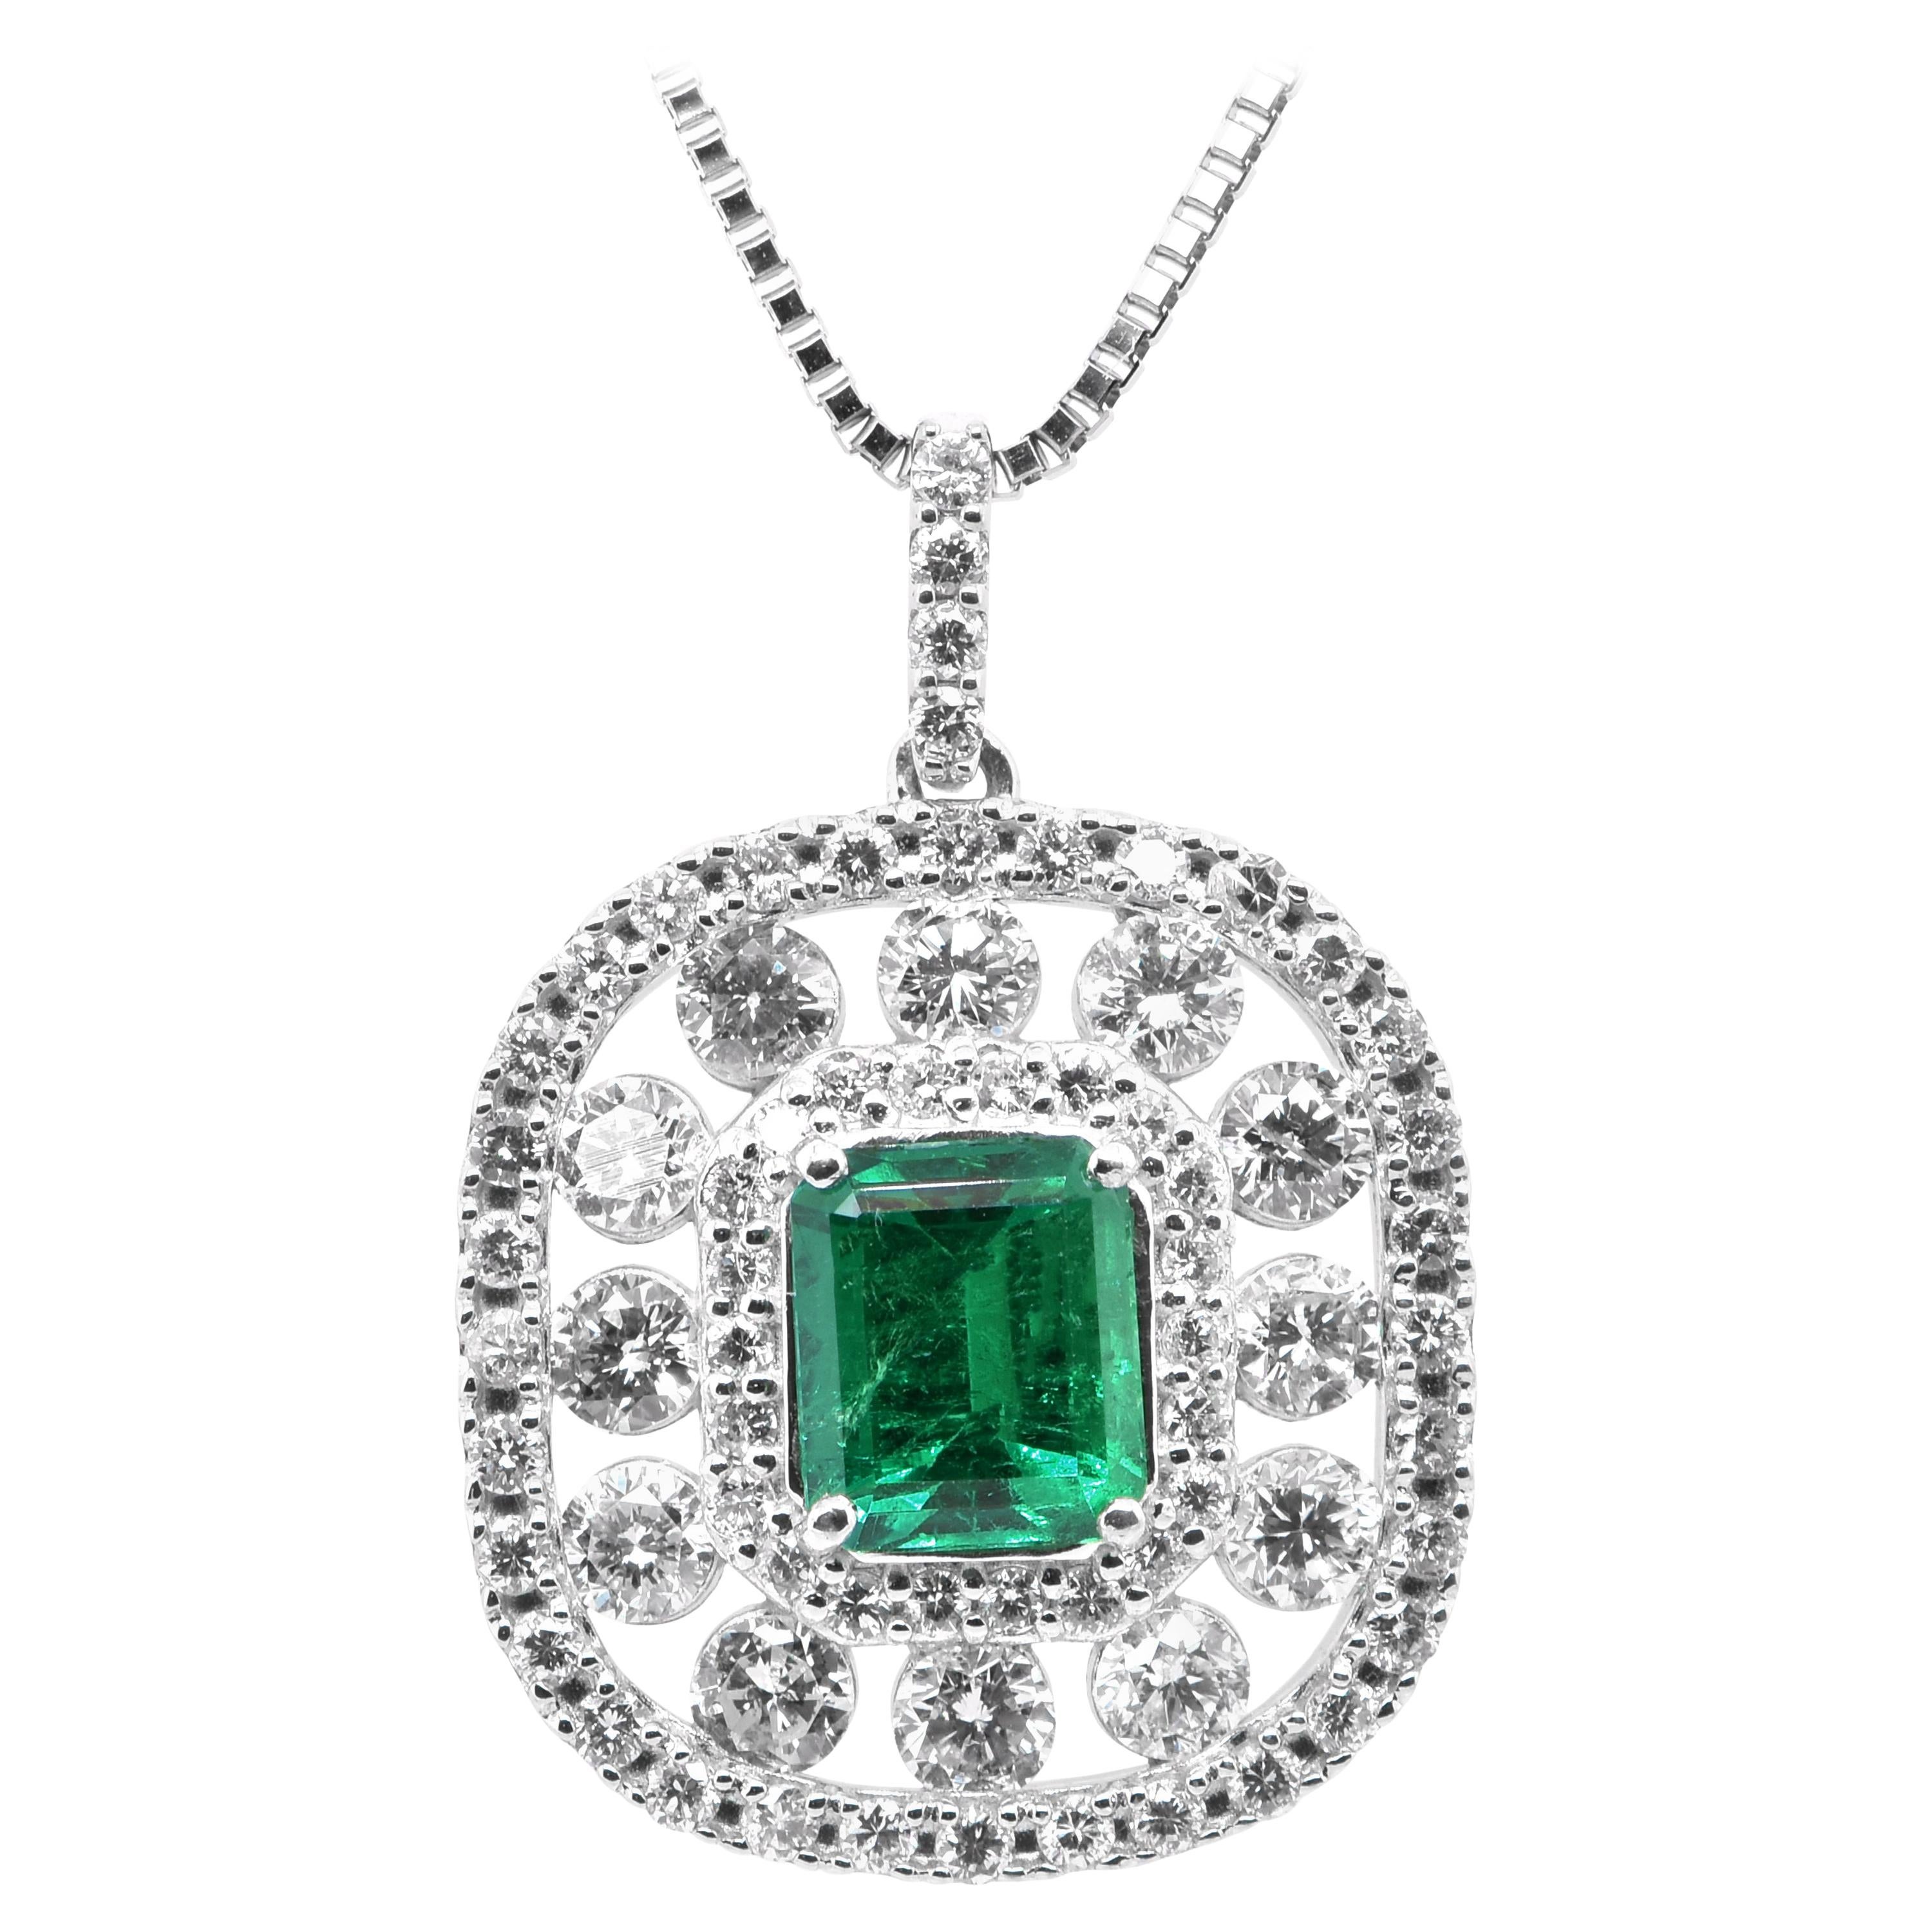 0.92 Carat Natural Emerald and Diamond Chain Necklace Set in Platinum